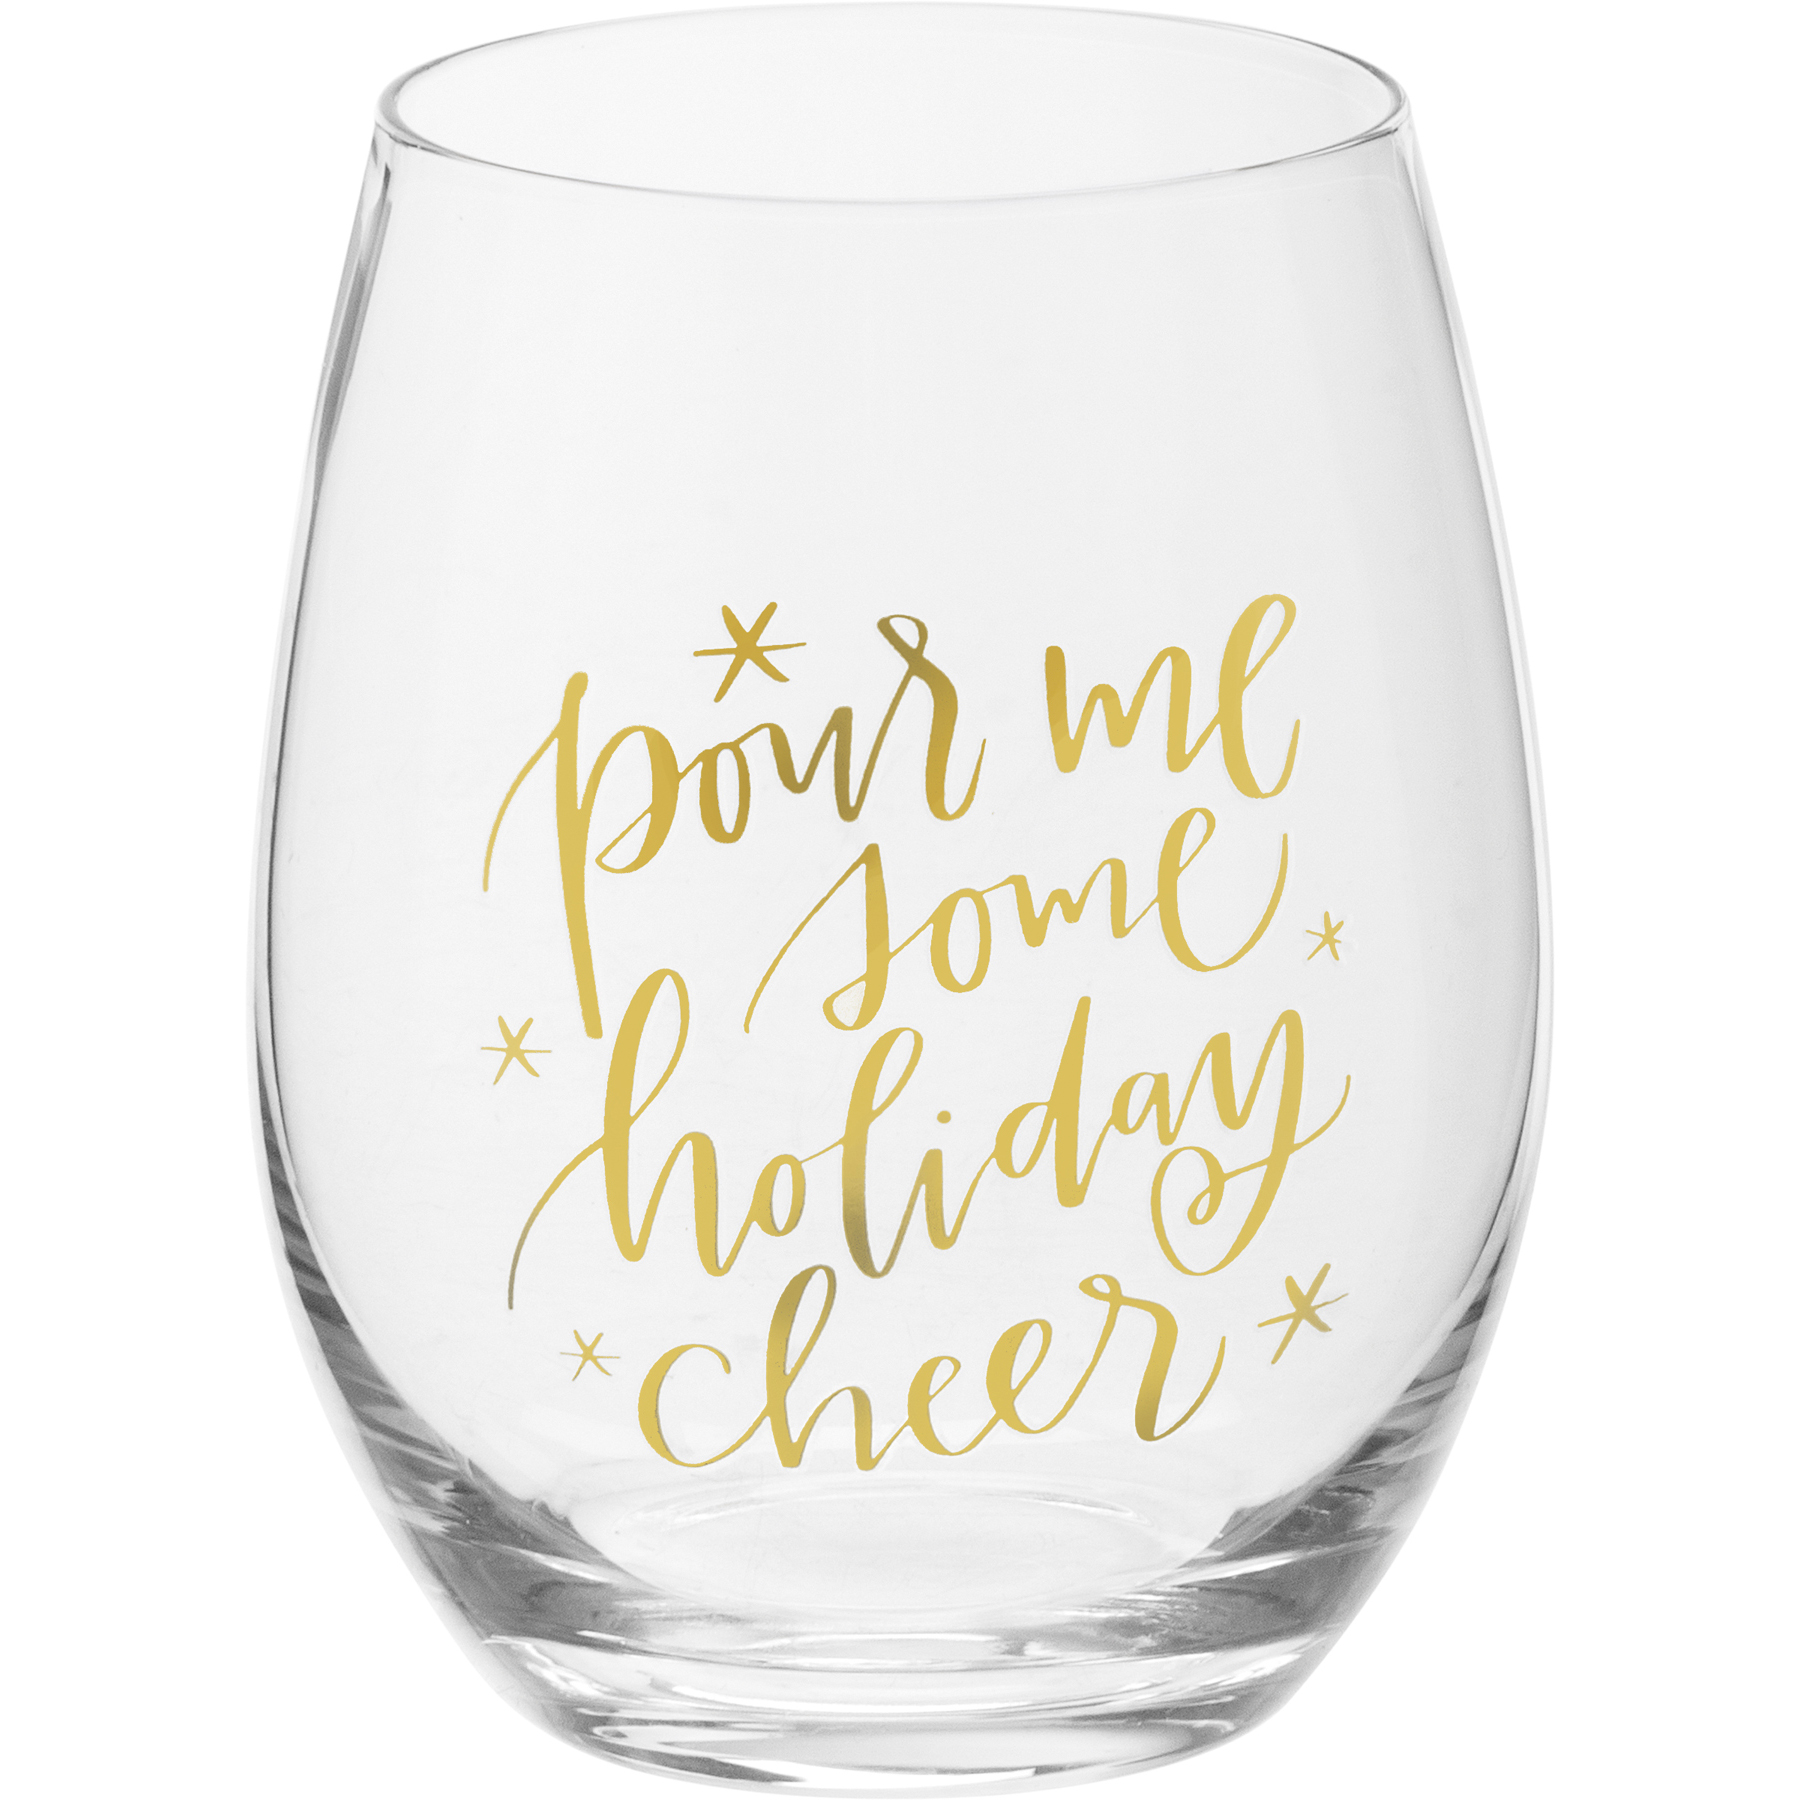 Holiday Cheer Set of 4 Stemless Wine Glasses with Christmas Icons